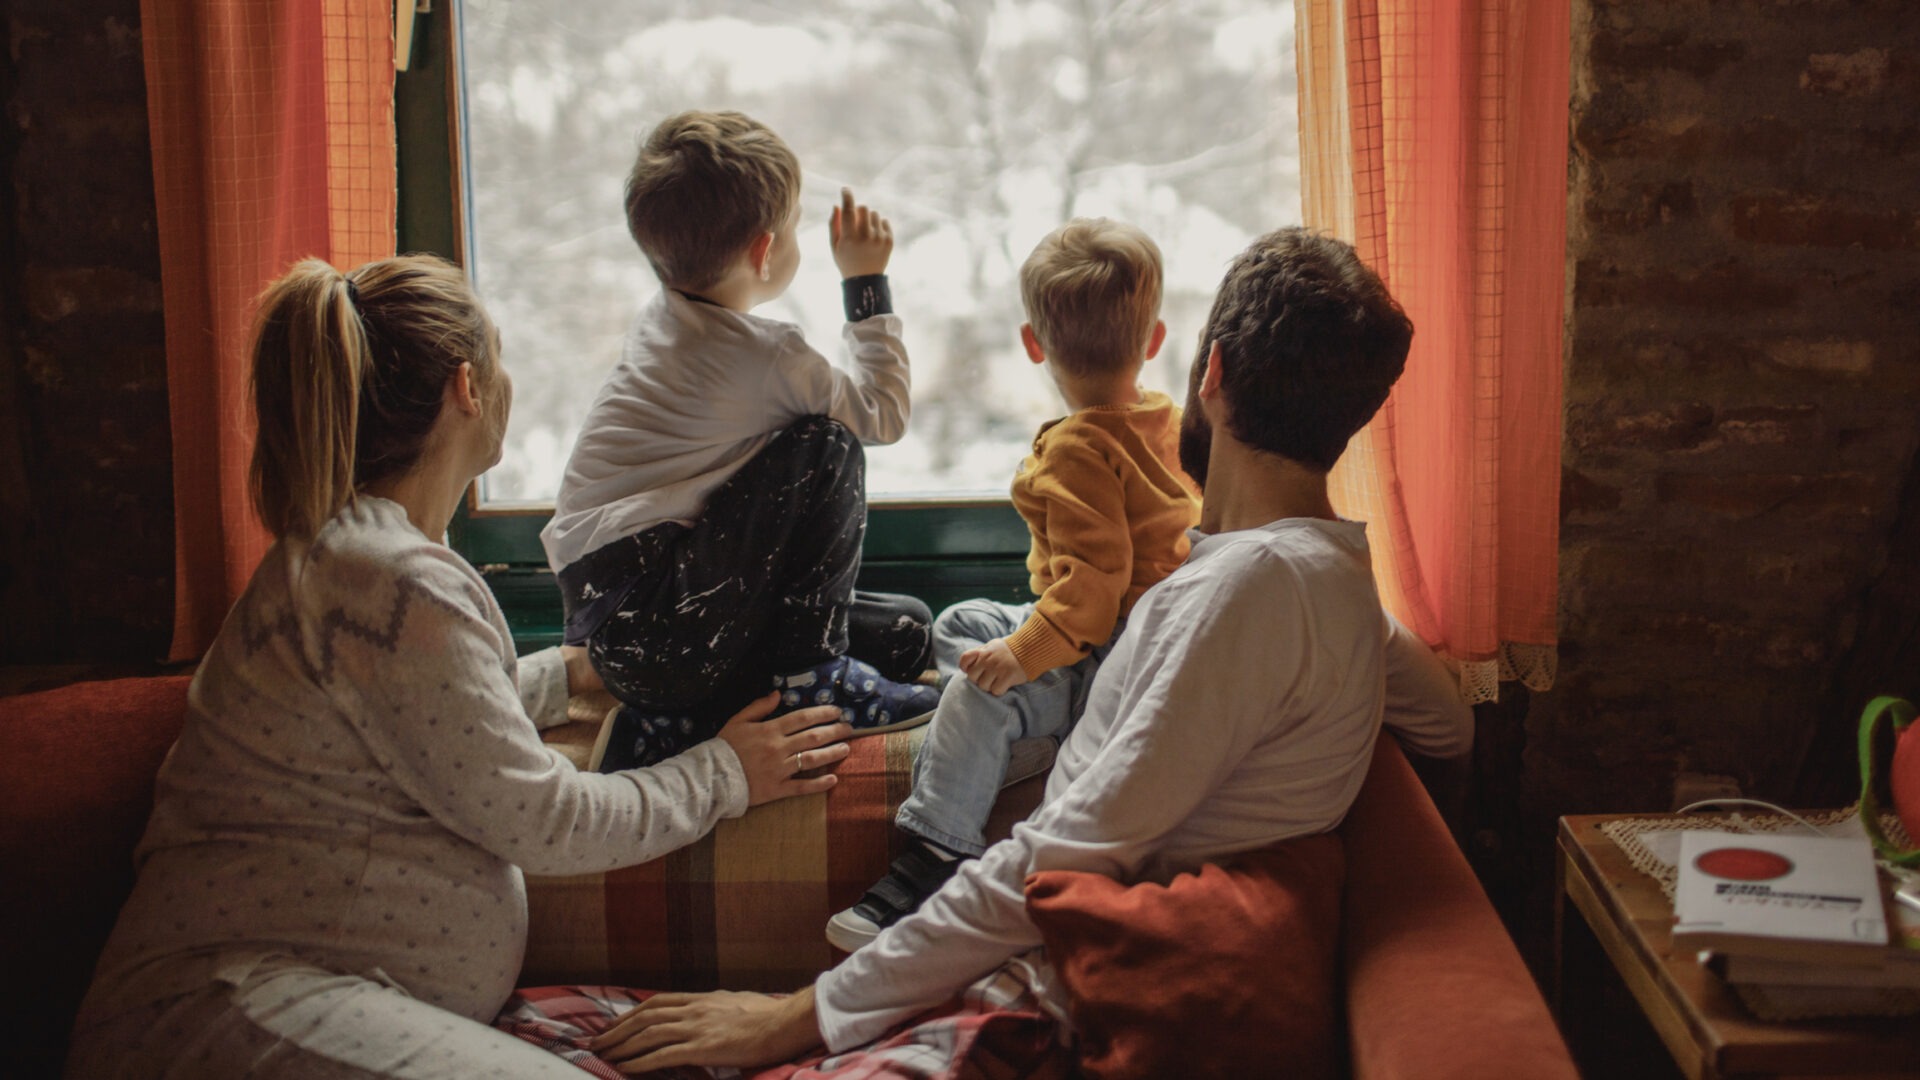 Two adults and two children sit near a window, gazing outside at a snow-covered landscape, with warm lighting and cozy interior surroundings.